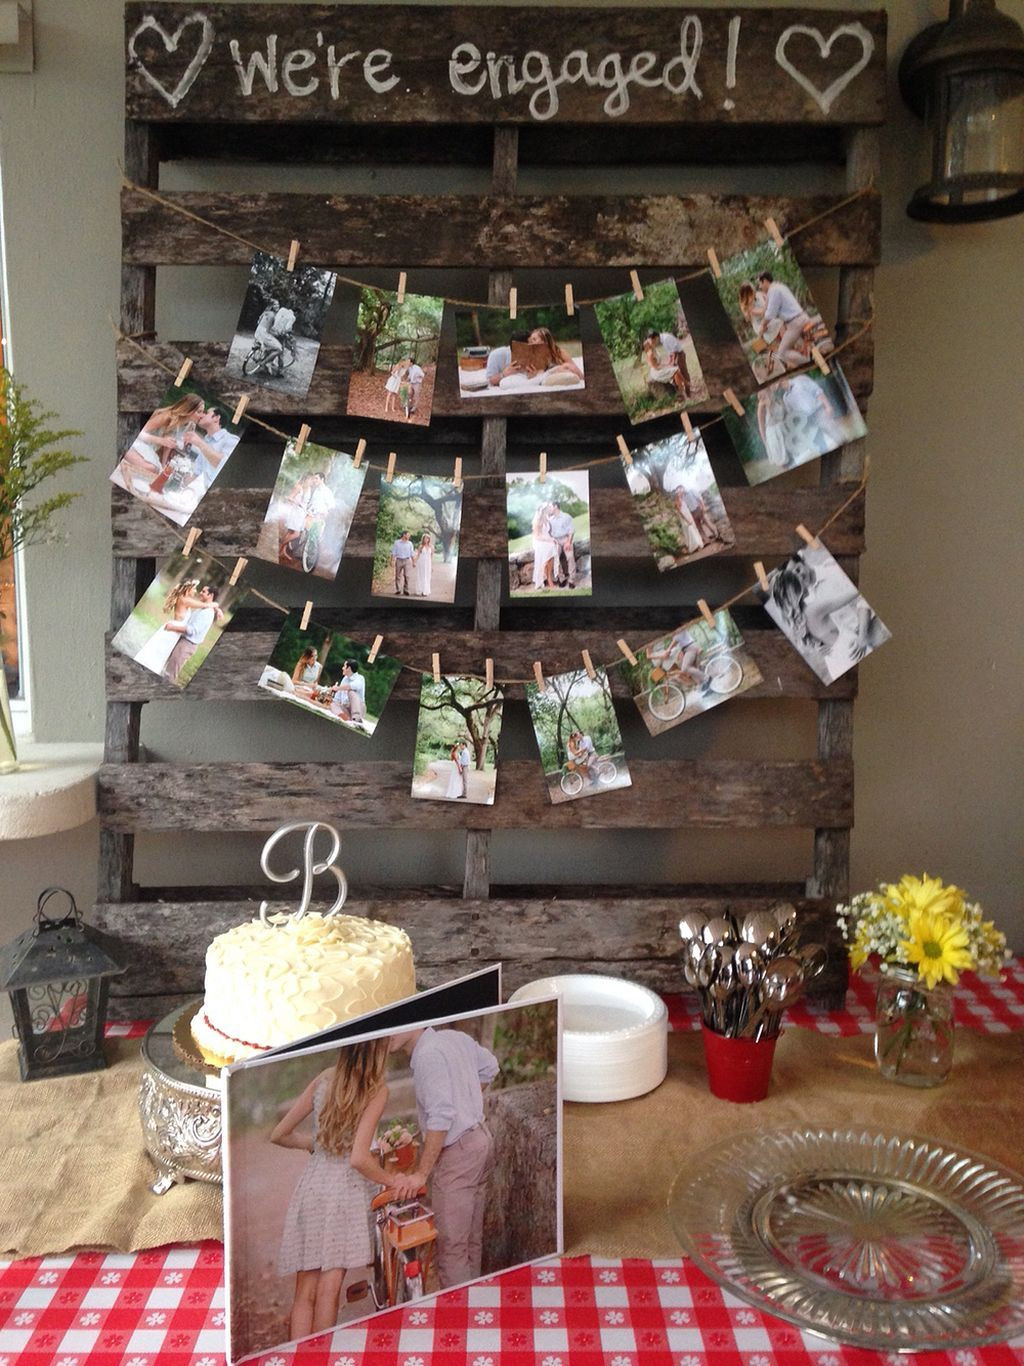 Backyard Engagement Party Decorating Ideas
 Tips for Looking Your Best on Your Wedding Day